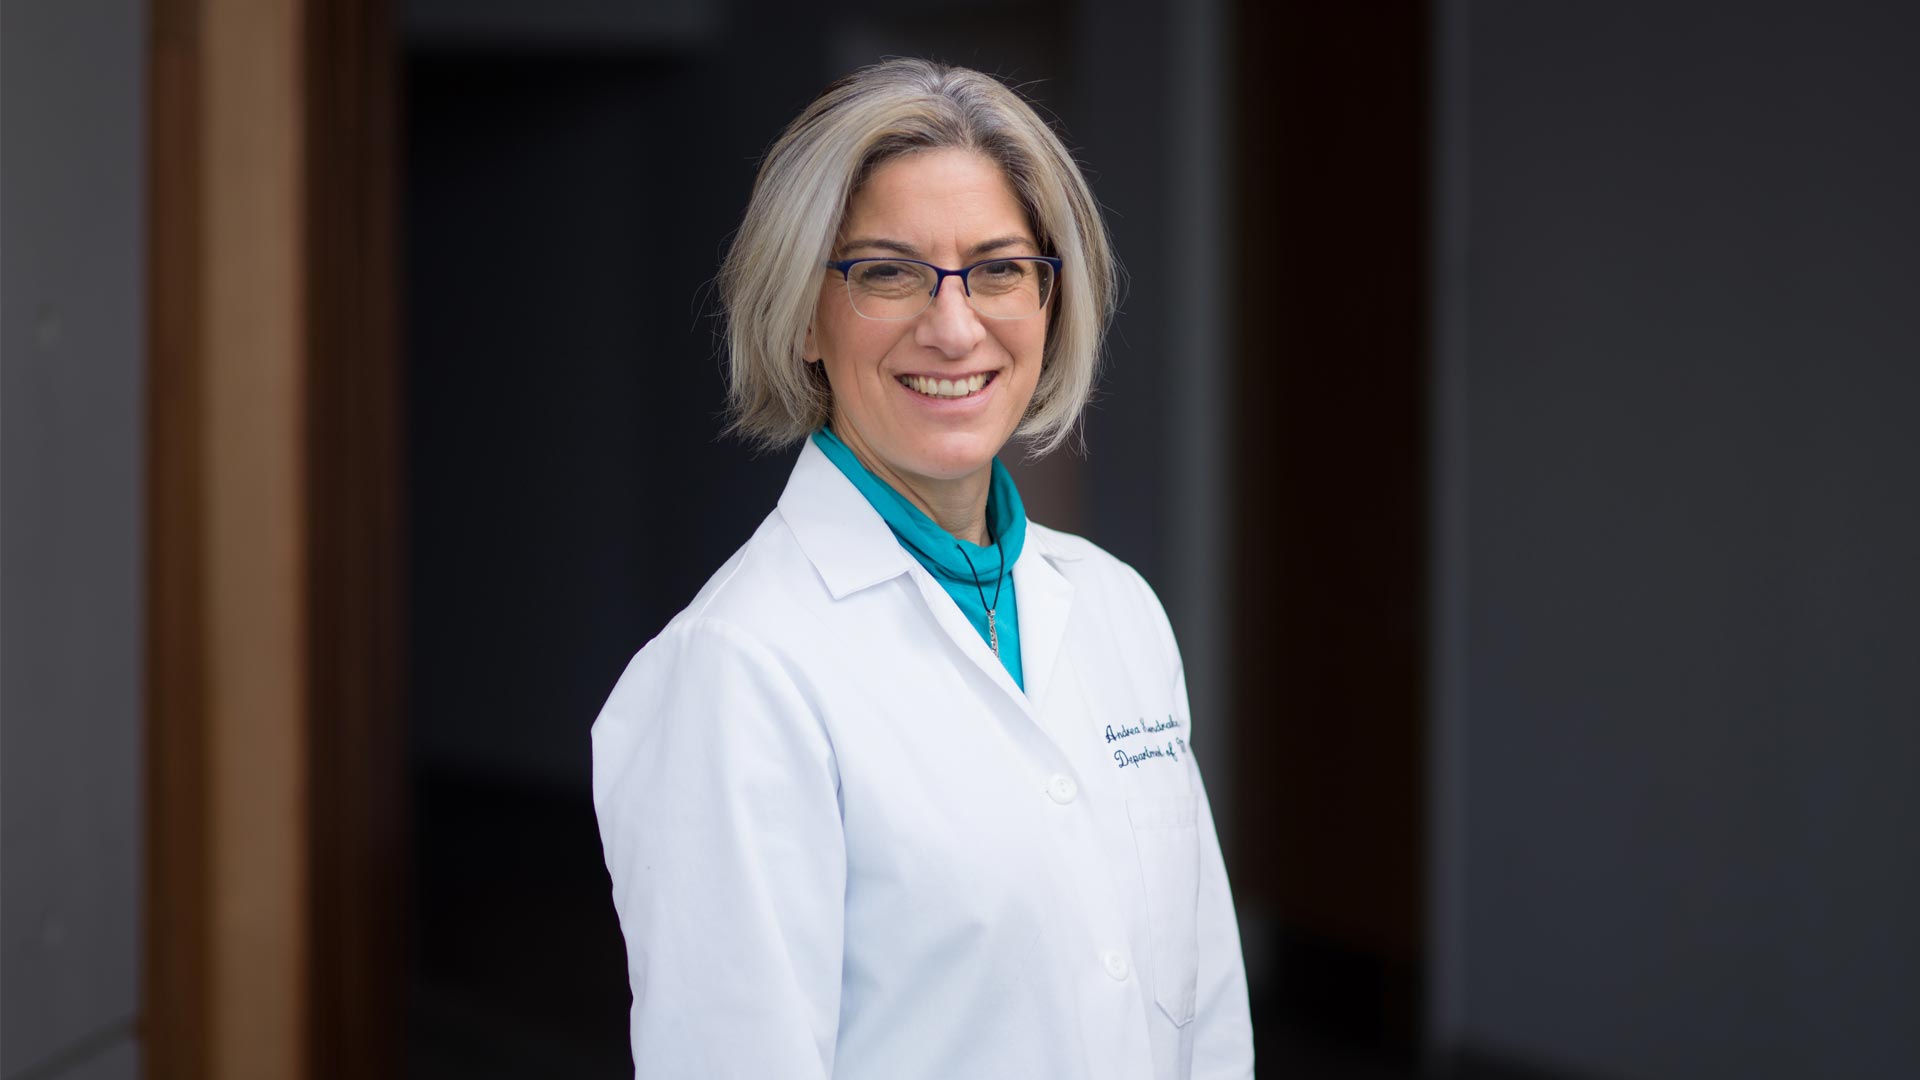 Andrea Kondracke, M.D., Named Director of New Division of Psychiatry and Medicine